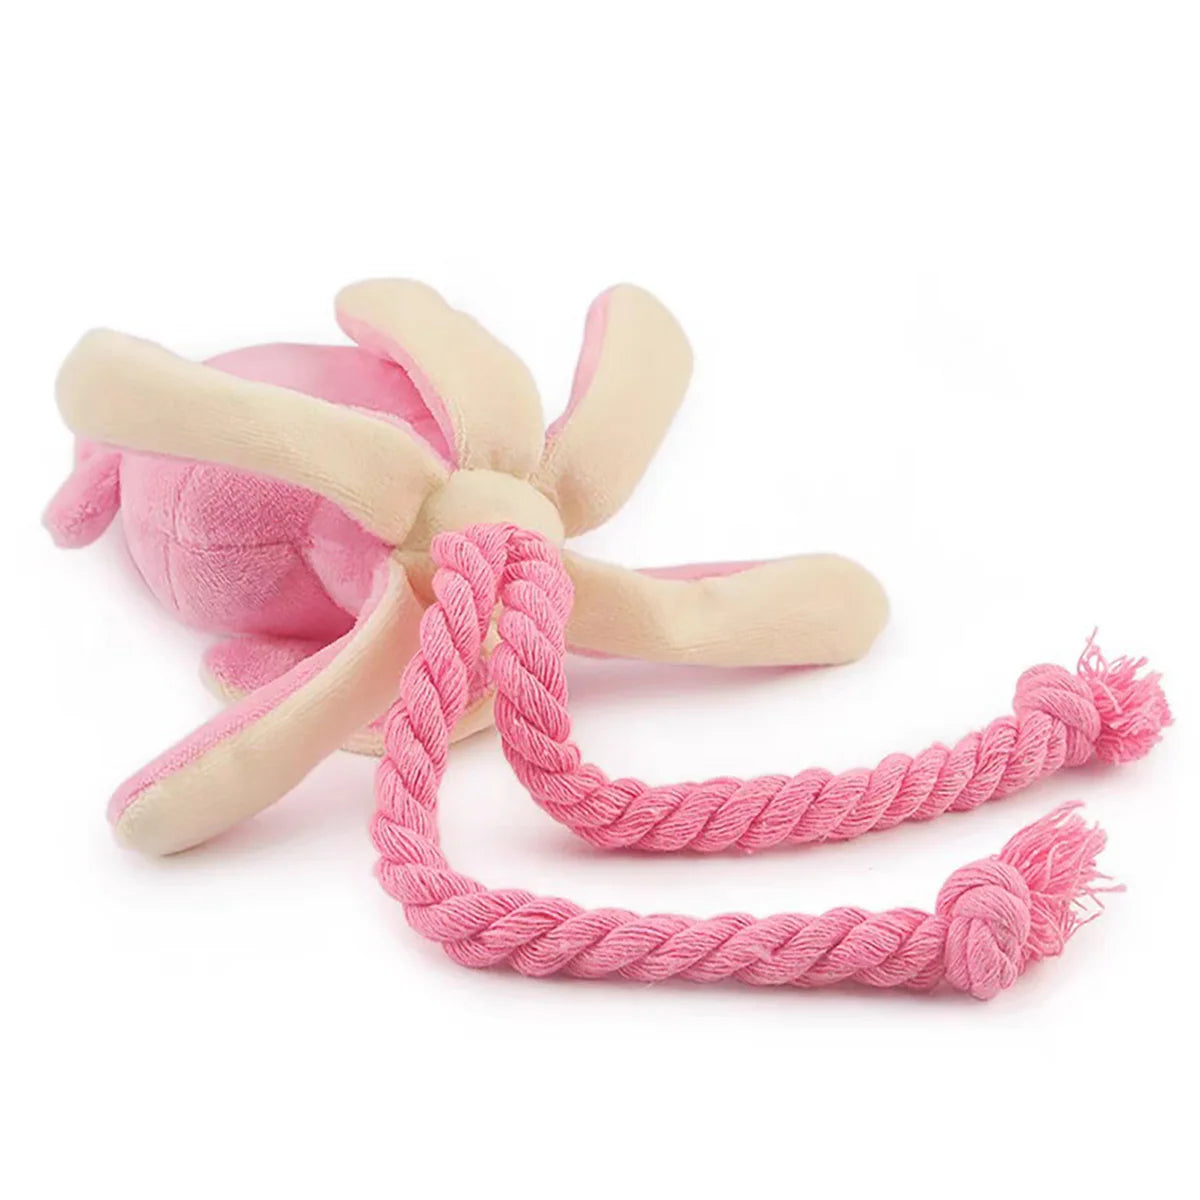 Supet Pet Octopus Rope Toy: Durable, Fun, Interactive Pet Toy for Dogs and Cats!